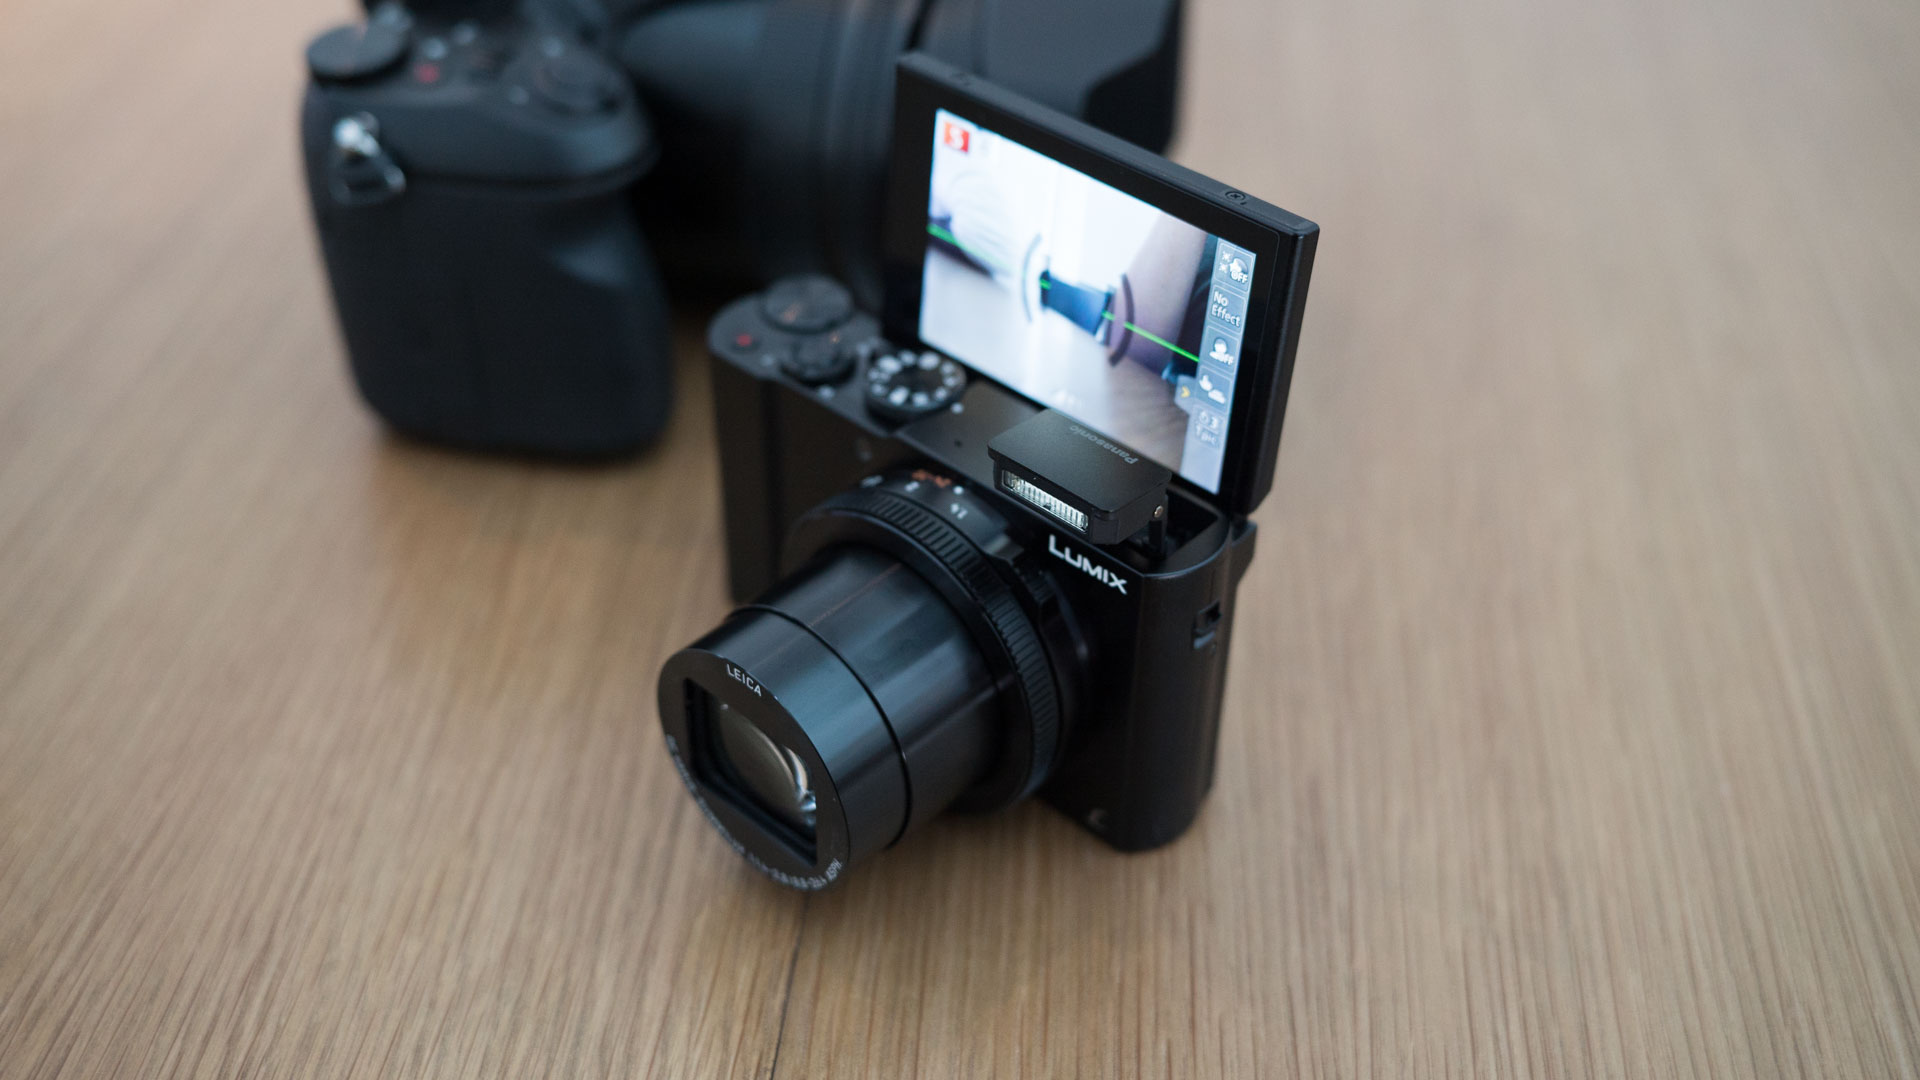 Compact cameras with manual exposure control